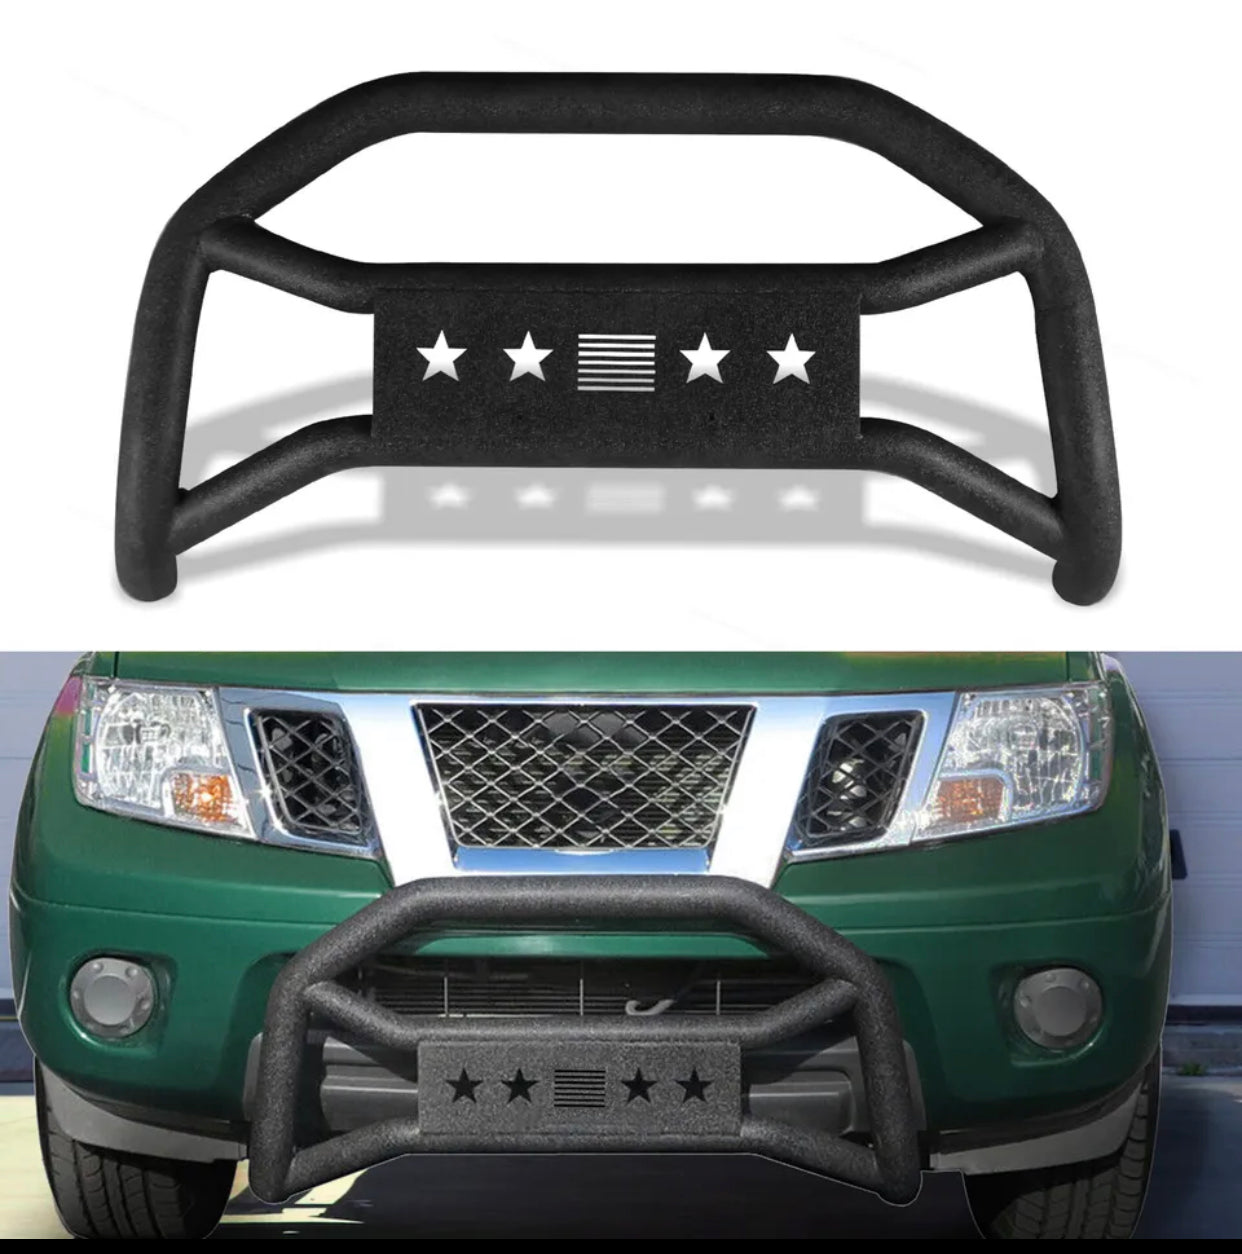 Steel Bull Bar Bumper Grille Guard Fits 2005-2021 Nissan Frontier Guard Protector